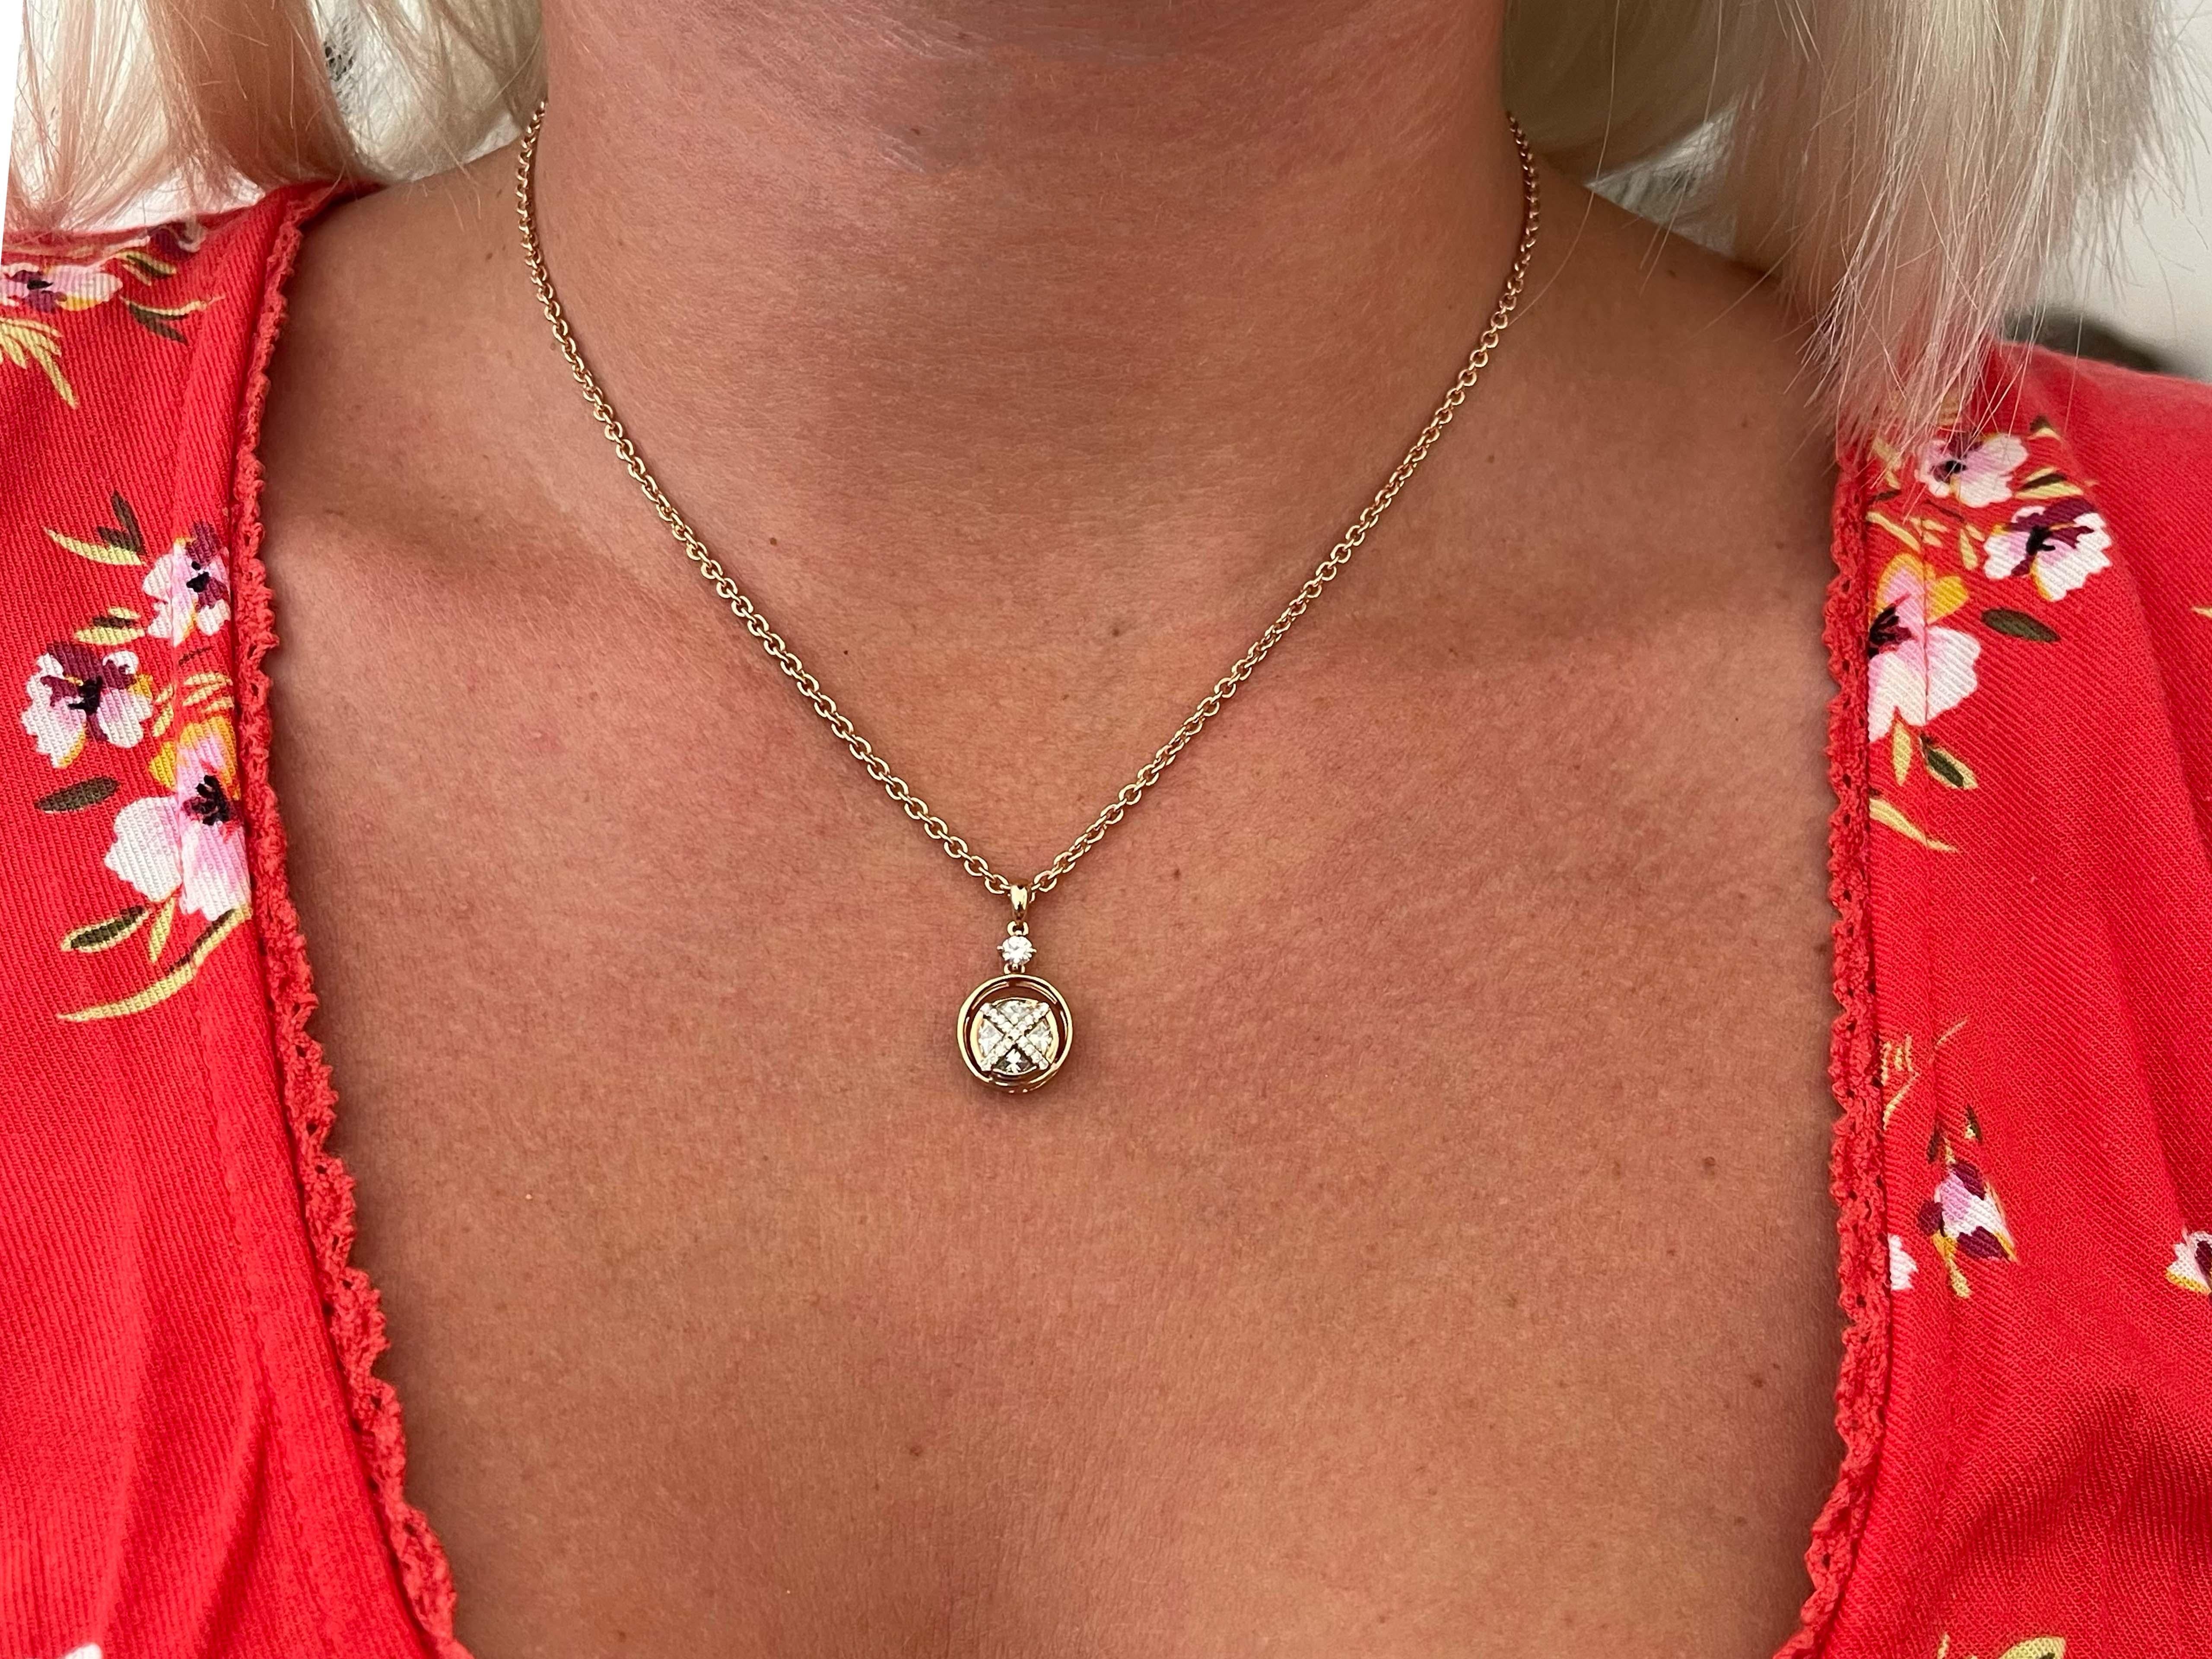 The center pie-cut diamond is G-H in color and VS in clarity and weighs 0.60 carats. The pendant features an additional 18 round brilliant diamonds, G in color and VS in clarity, weighing 0.18 carats. Altogether the diamond weight is 0.78 carats.